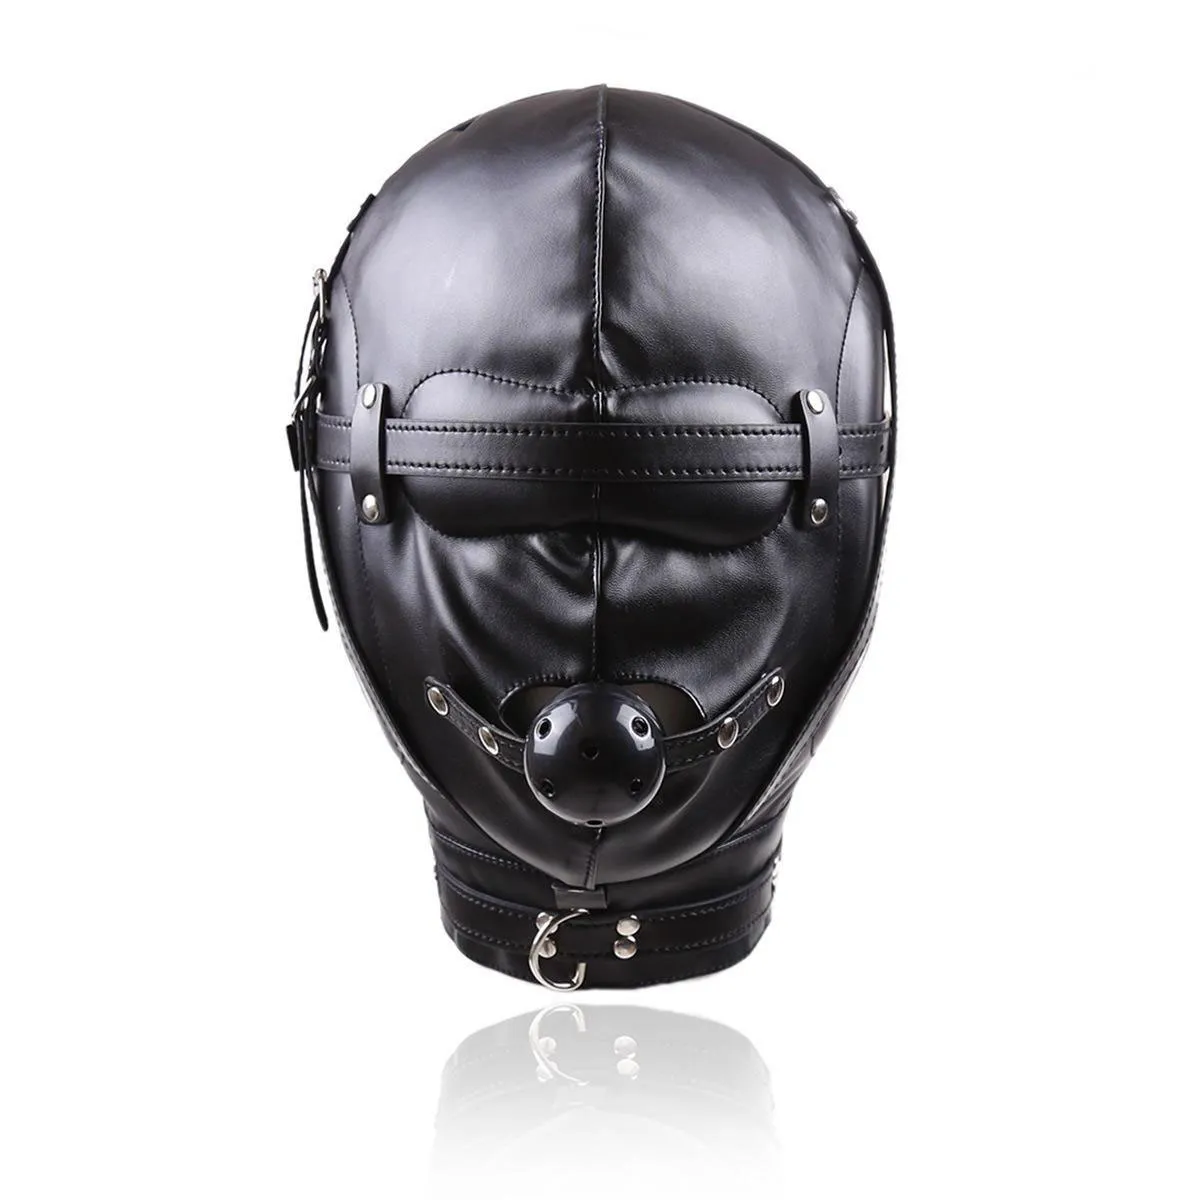 2023 New Fetish PU Leather BDSM Bondage Hood SM Totally Enclosed Mask With Lock Slave Restraints Sex Toy For Couples Sex Product9643192